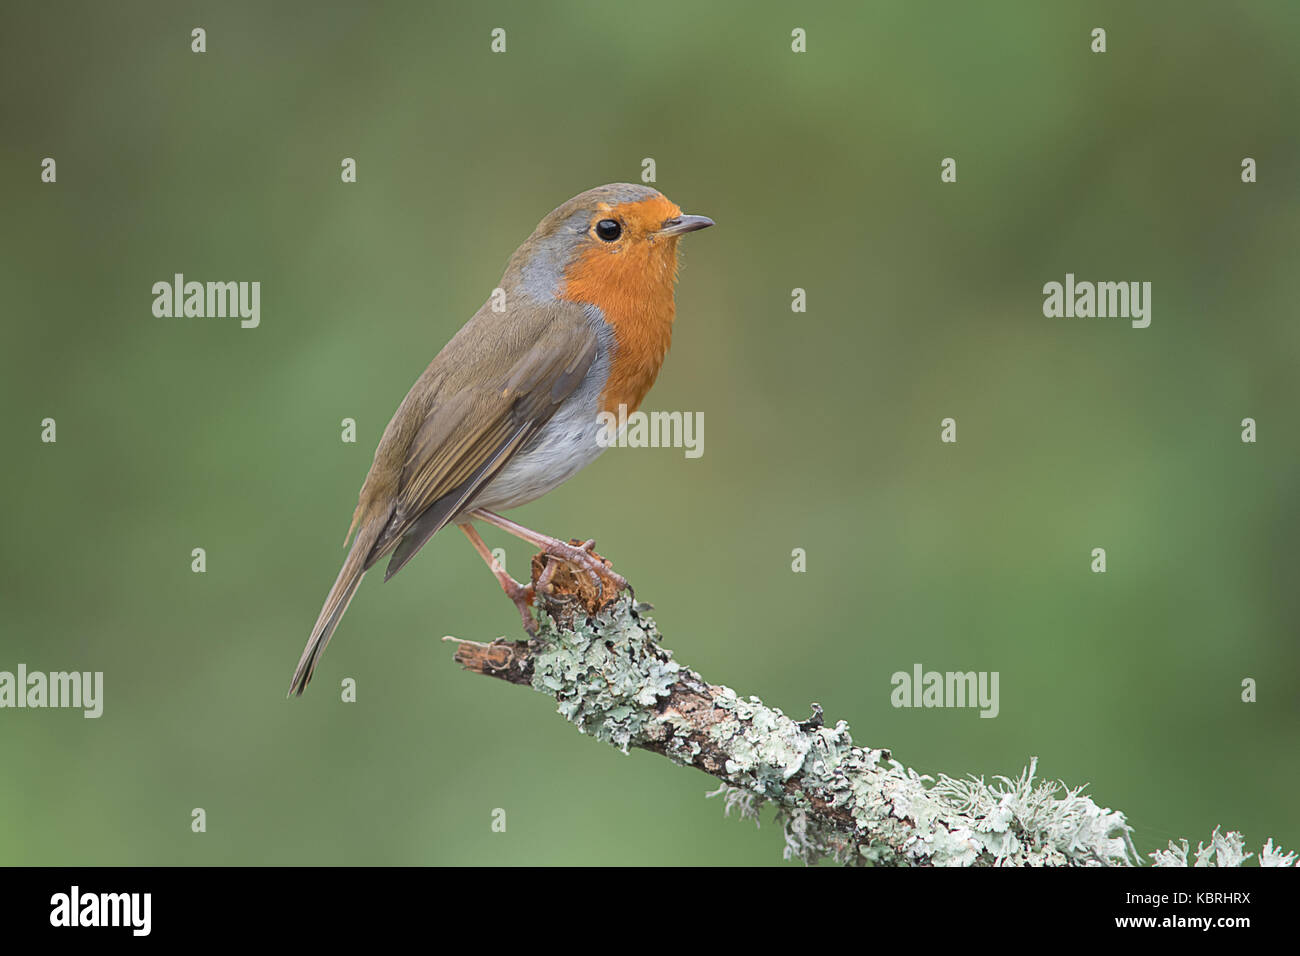 A close up profile portrait of a robin perched on the end of a branch facing to the right with a natural green background and text space Stock Photo